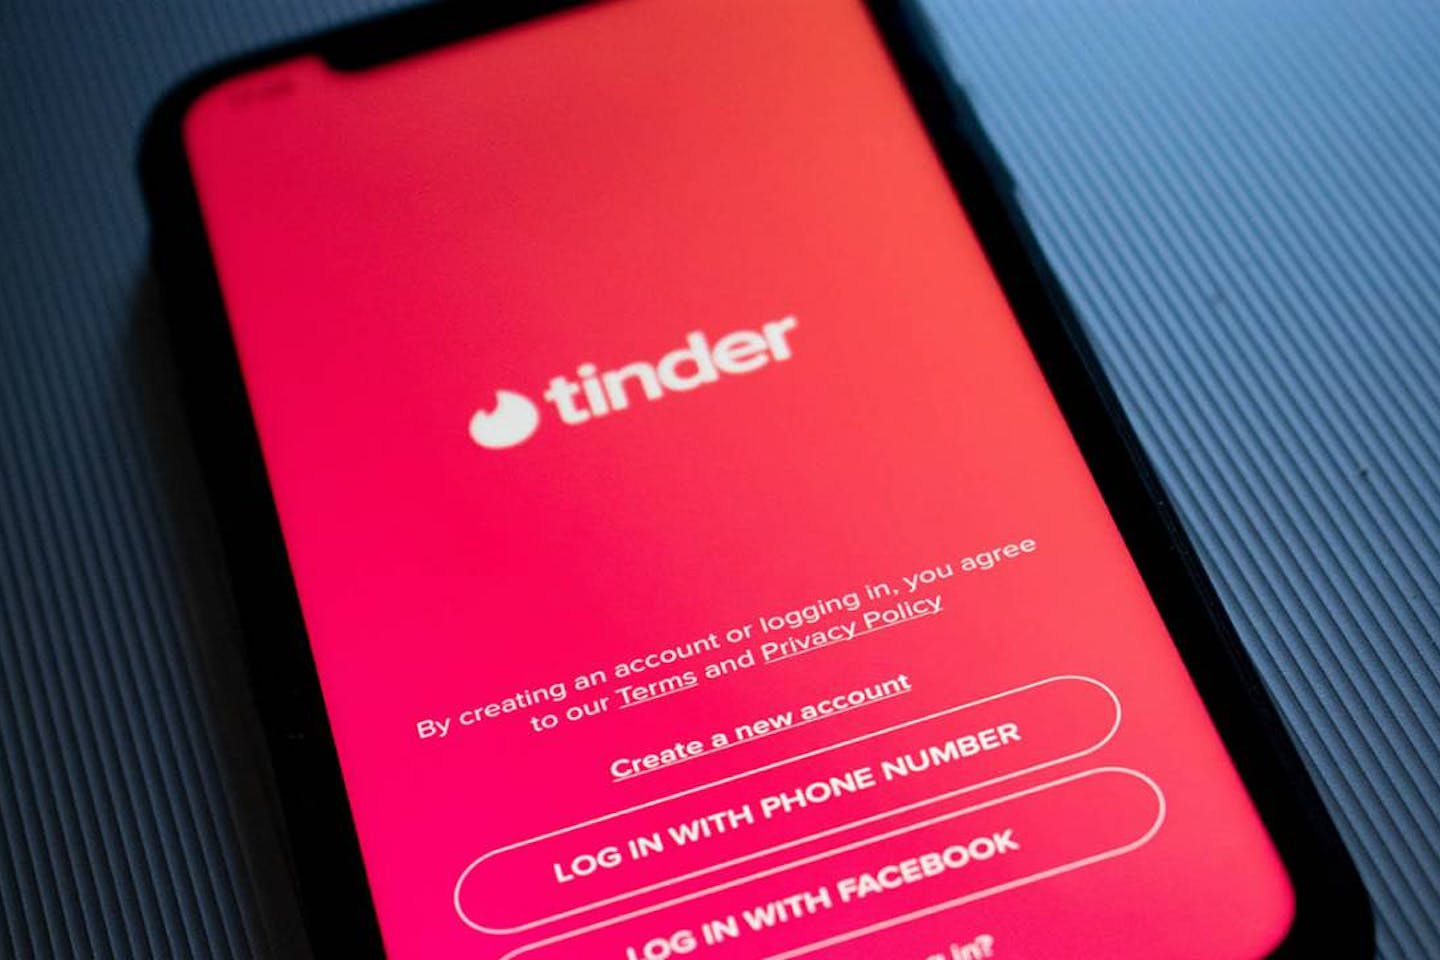 Online Dating Industry: The Business of Love